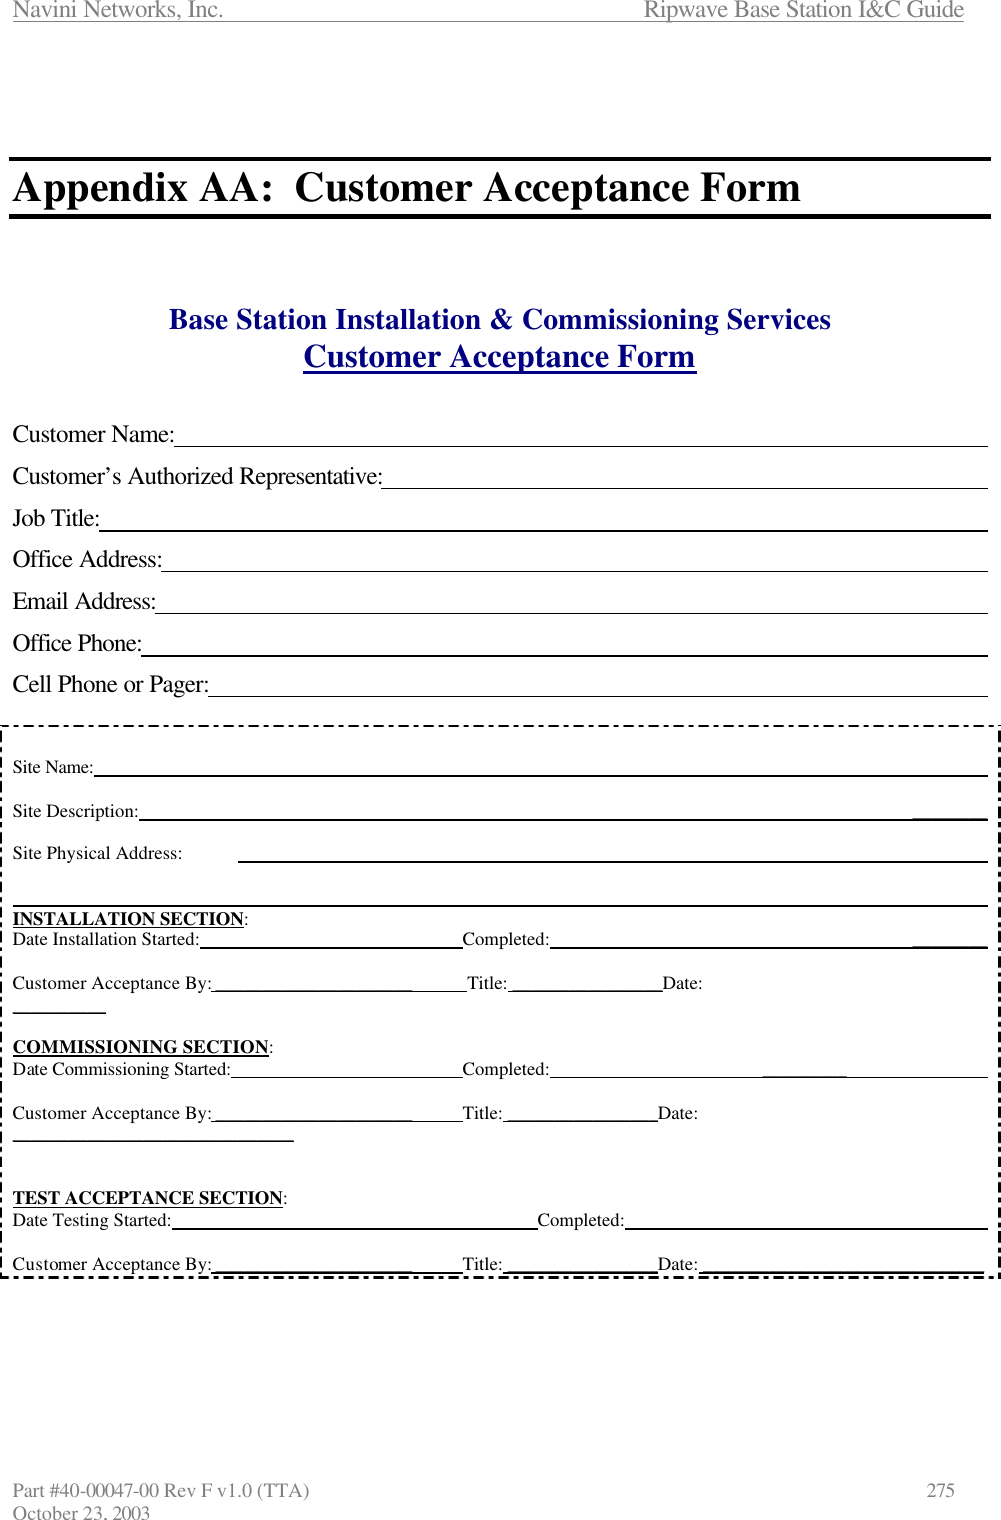 Navini Networks, Inc.                      Ripwave Base Station I&amp;C Guide Part #40-00047-00 Rev F v1.0 (TTA)            275 October 23, 2003    Appendix AA:  Customer Acceptance Form    Base Station Installation &amp; Commissioning Services Customer Acceptance Form   Customer Name:             Customer’s Authorized Representative:           Job Title:              Office Address:             Email Address:              Office Phone:              Cell Phone or Pager:              Site Name:              Site Description:                      ________  Site Physical Address:                           INSTALLATION SECTION: Date Installation Started:        Completed:           ________           Customer Acceptance By: _____________________   Title: ________________Date:                                          __________  COMMISSIONING SECTION: Date Commissioning Started:       Completed:      _________               Customer Acceptance By: _____________________   Title: ________________Date:  ______________________________   TEST ACCEPTANCE SECTION: Date Testing Started:          Completed:                     Customer Acceptance By: _____________________   Title: ________________Date: ______________________________     